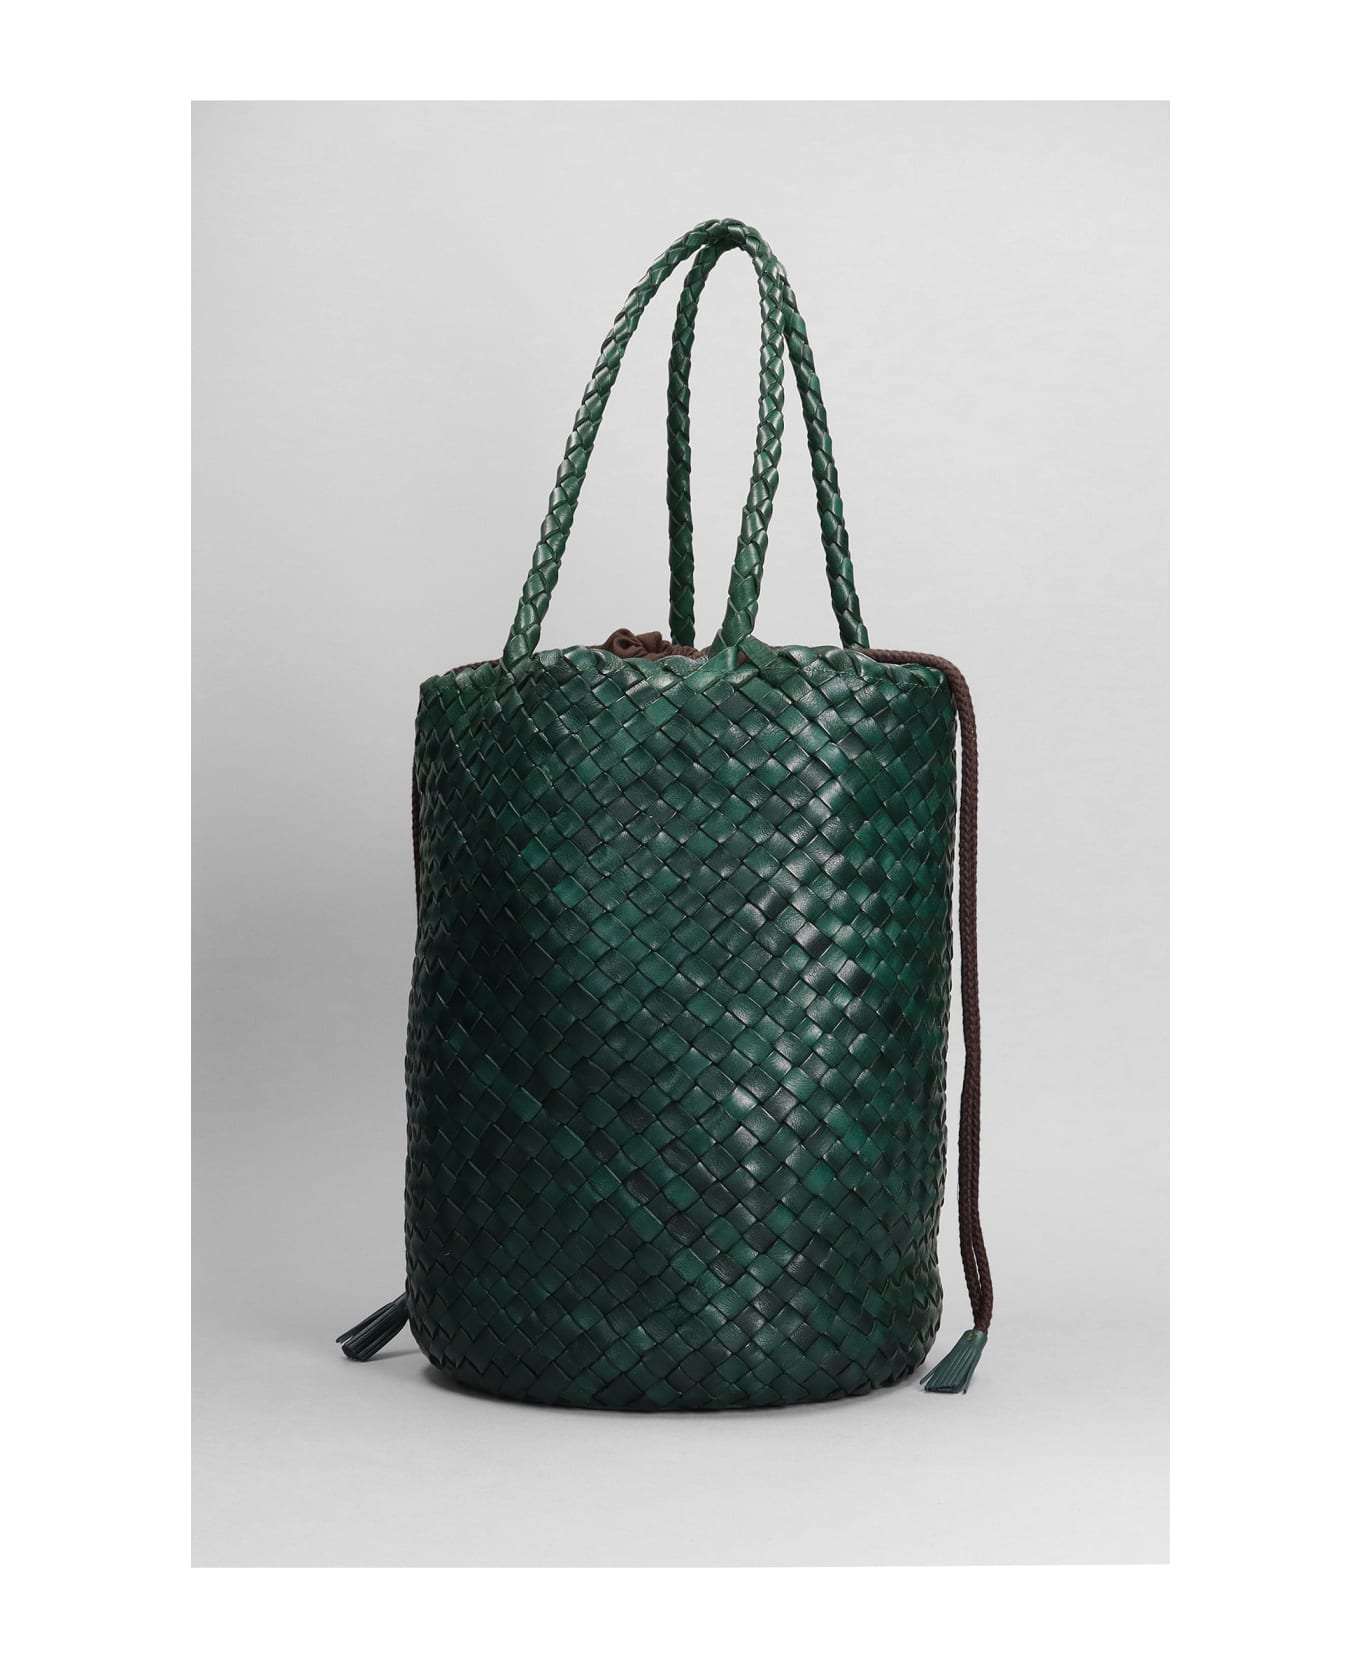 Dragon Diffusion Jacky Bucket Hand Bag In Green Leather - green